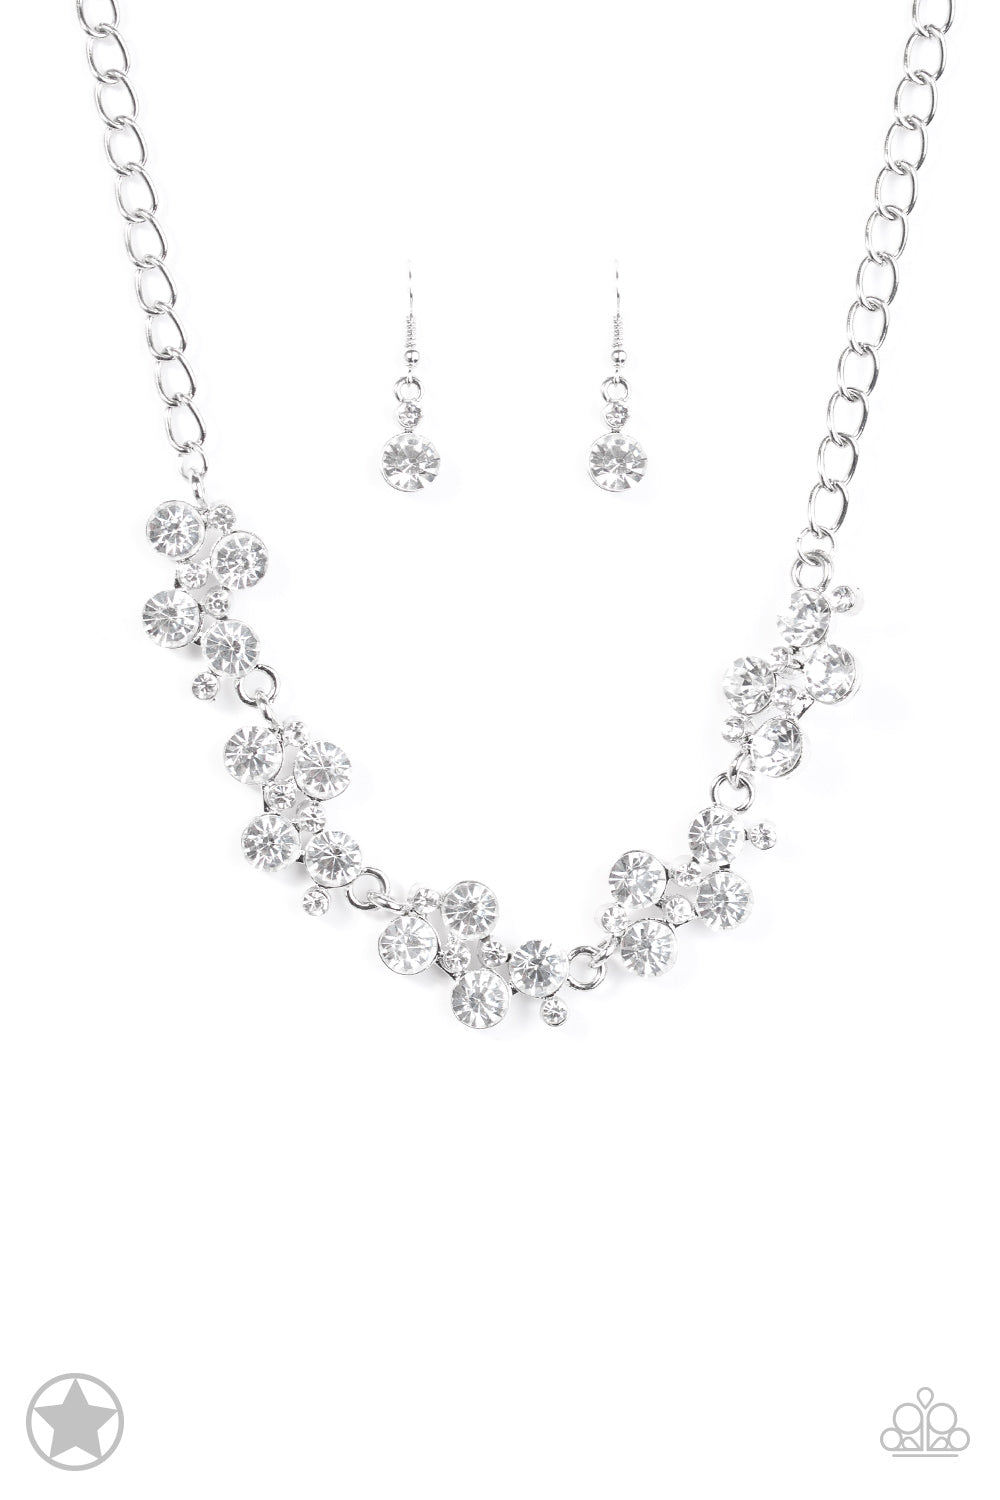 Paparazzi Accessories Hollywood Hills - White Blockbuster Necklaces - Lady T Accessories